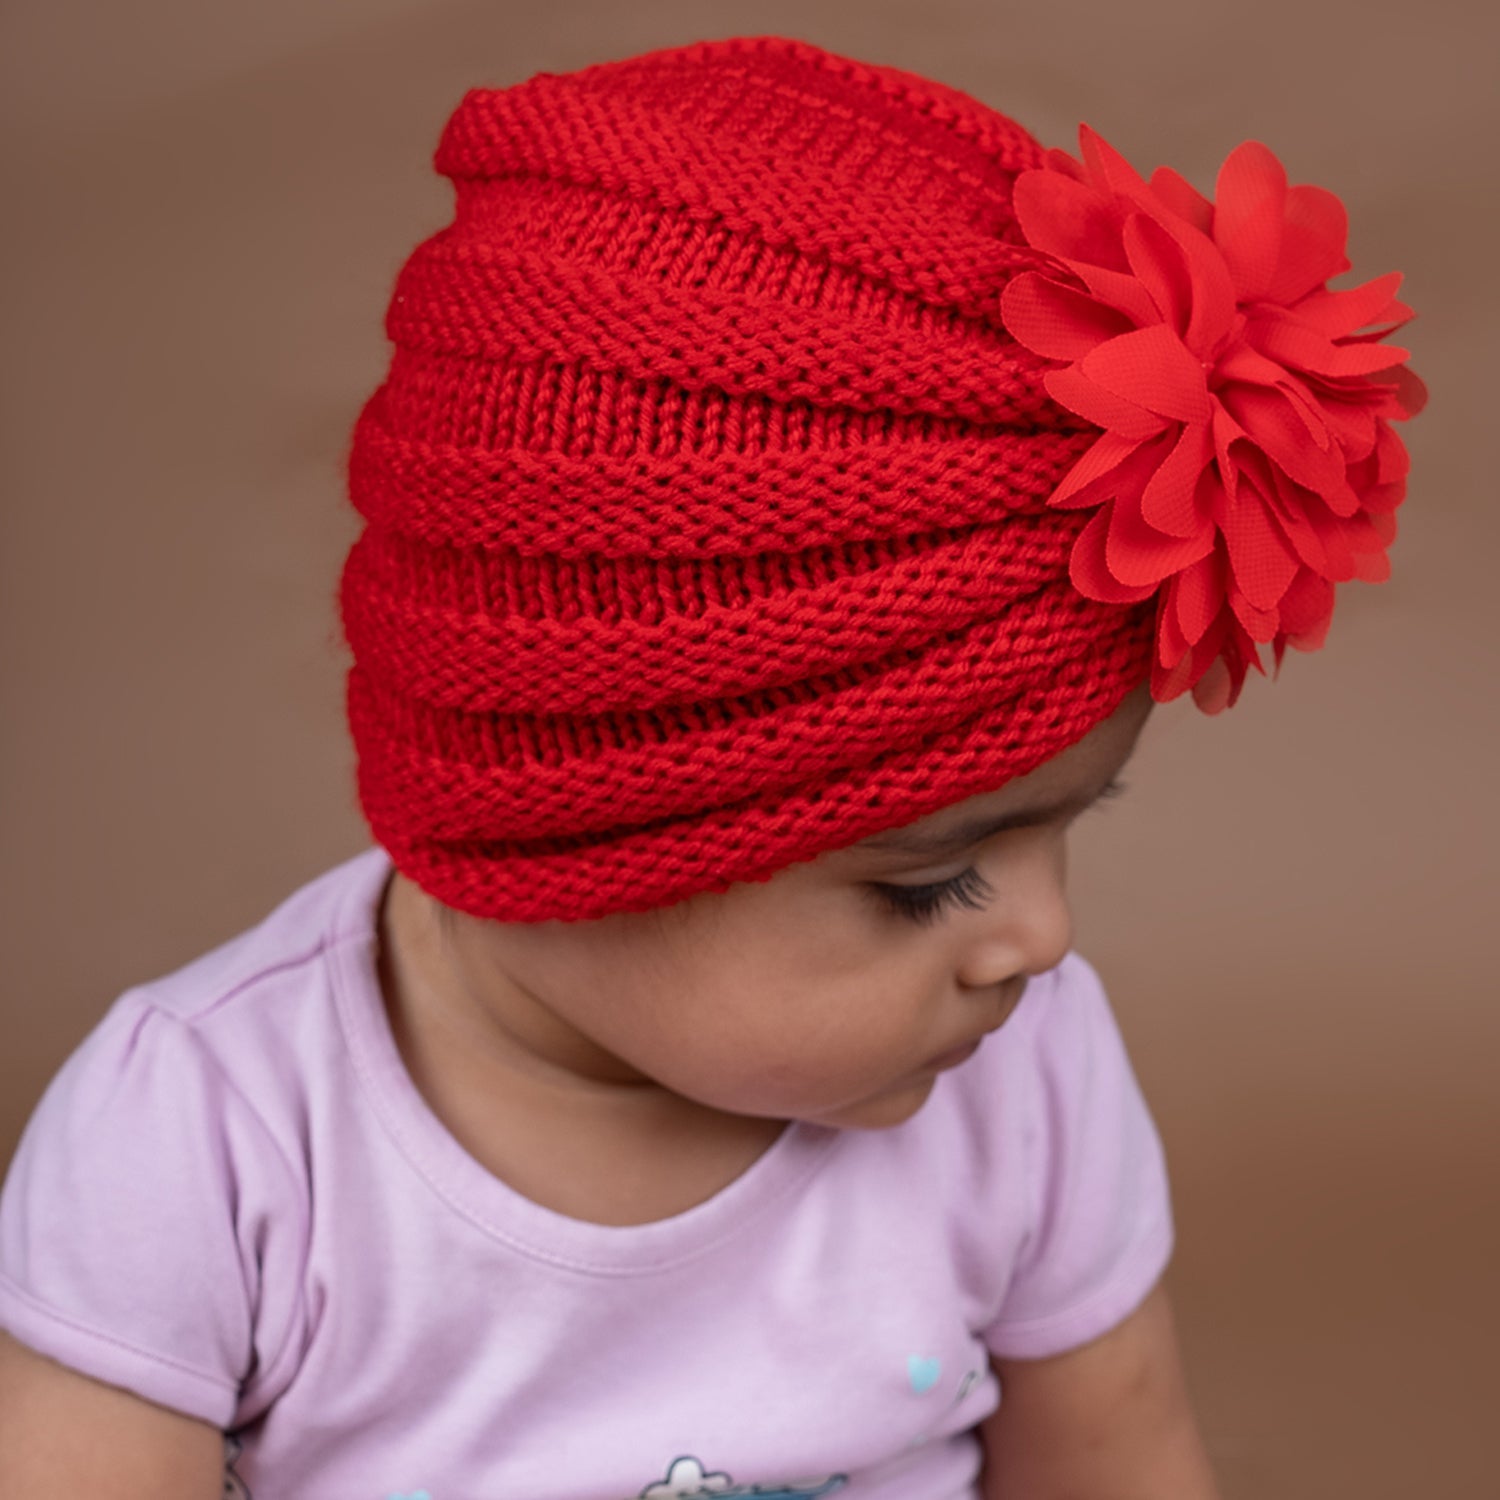 Baby Moo Girls Floral Petals 2 Pack Knitted Turban Caps - Red, Pink